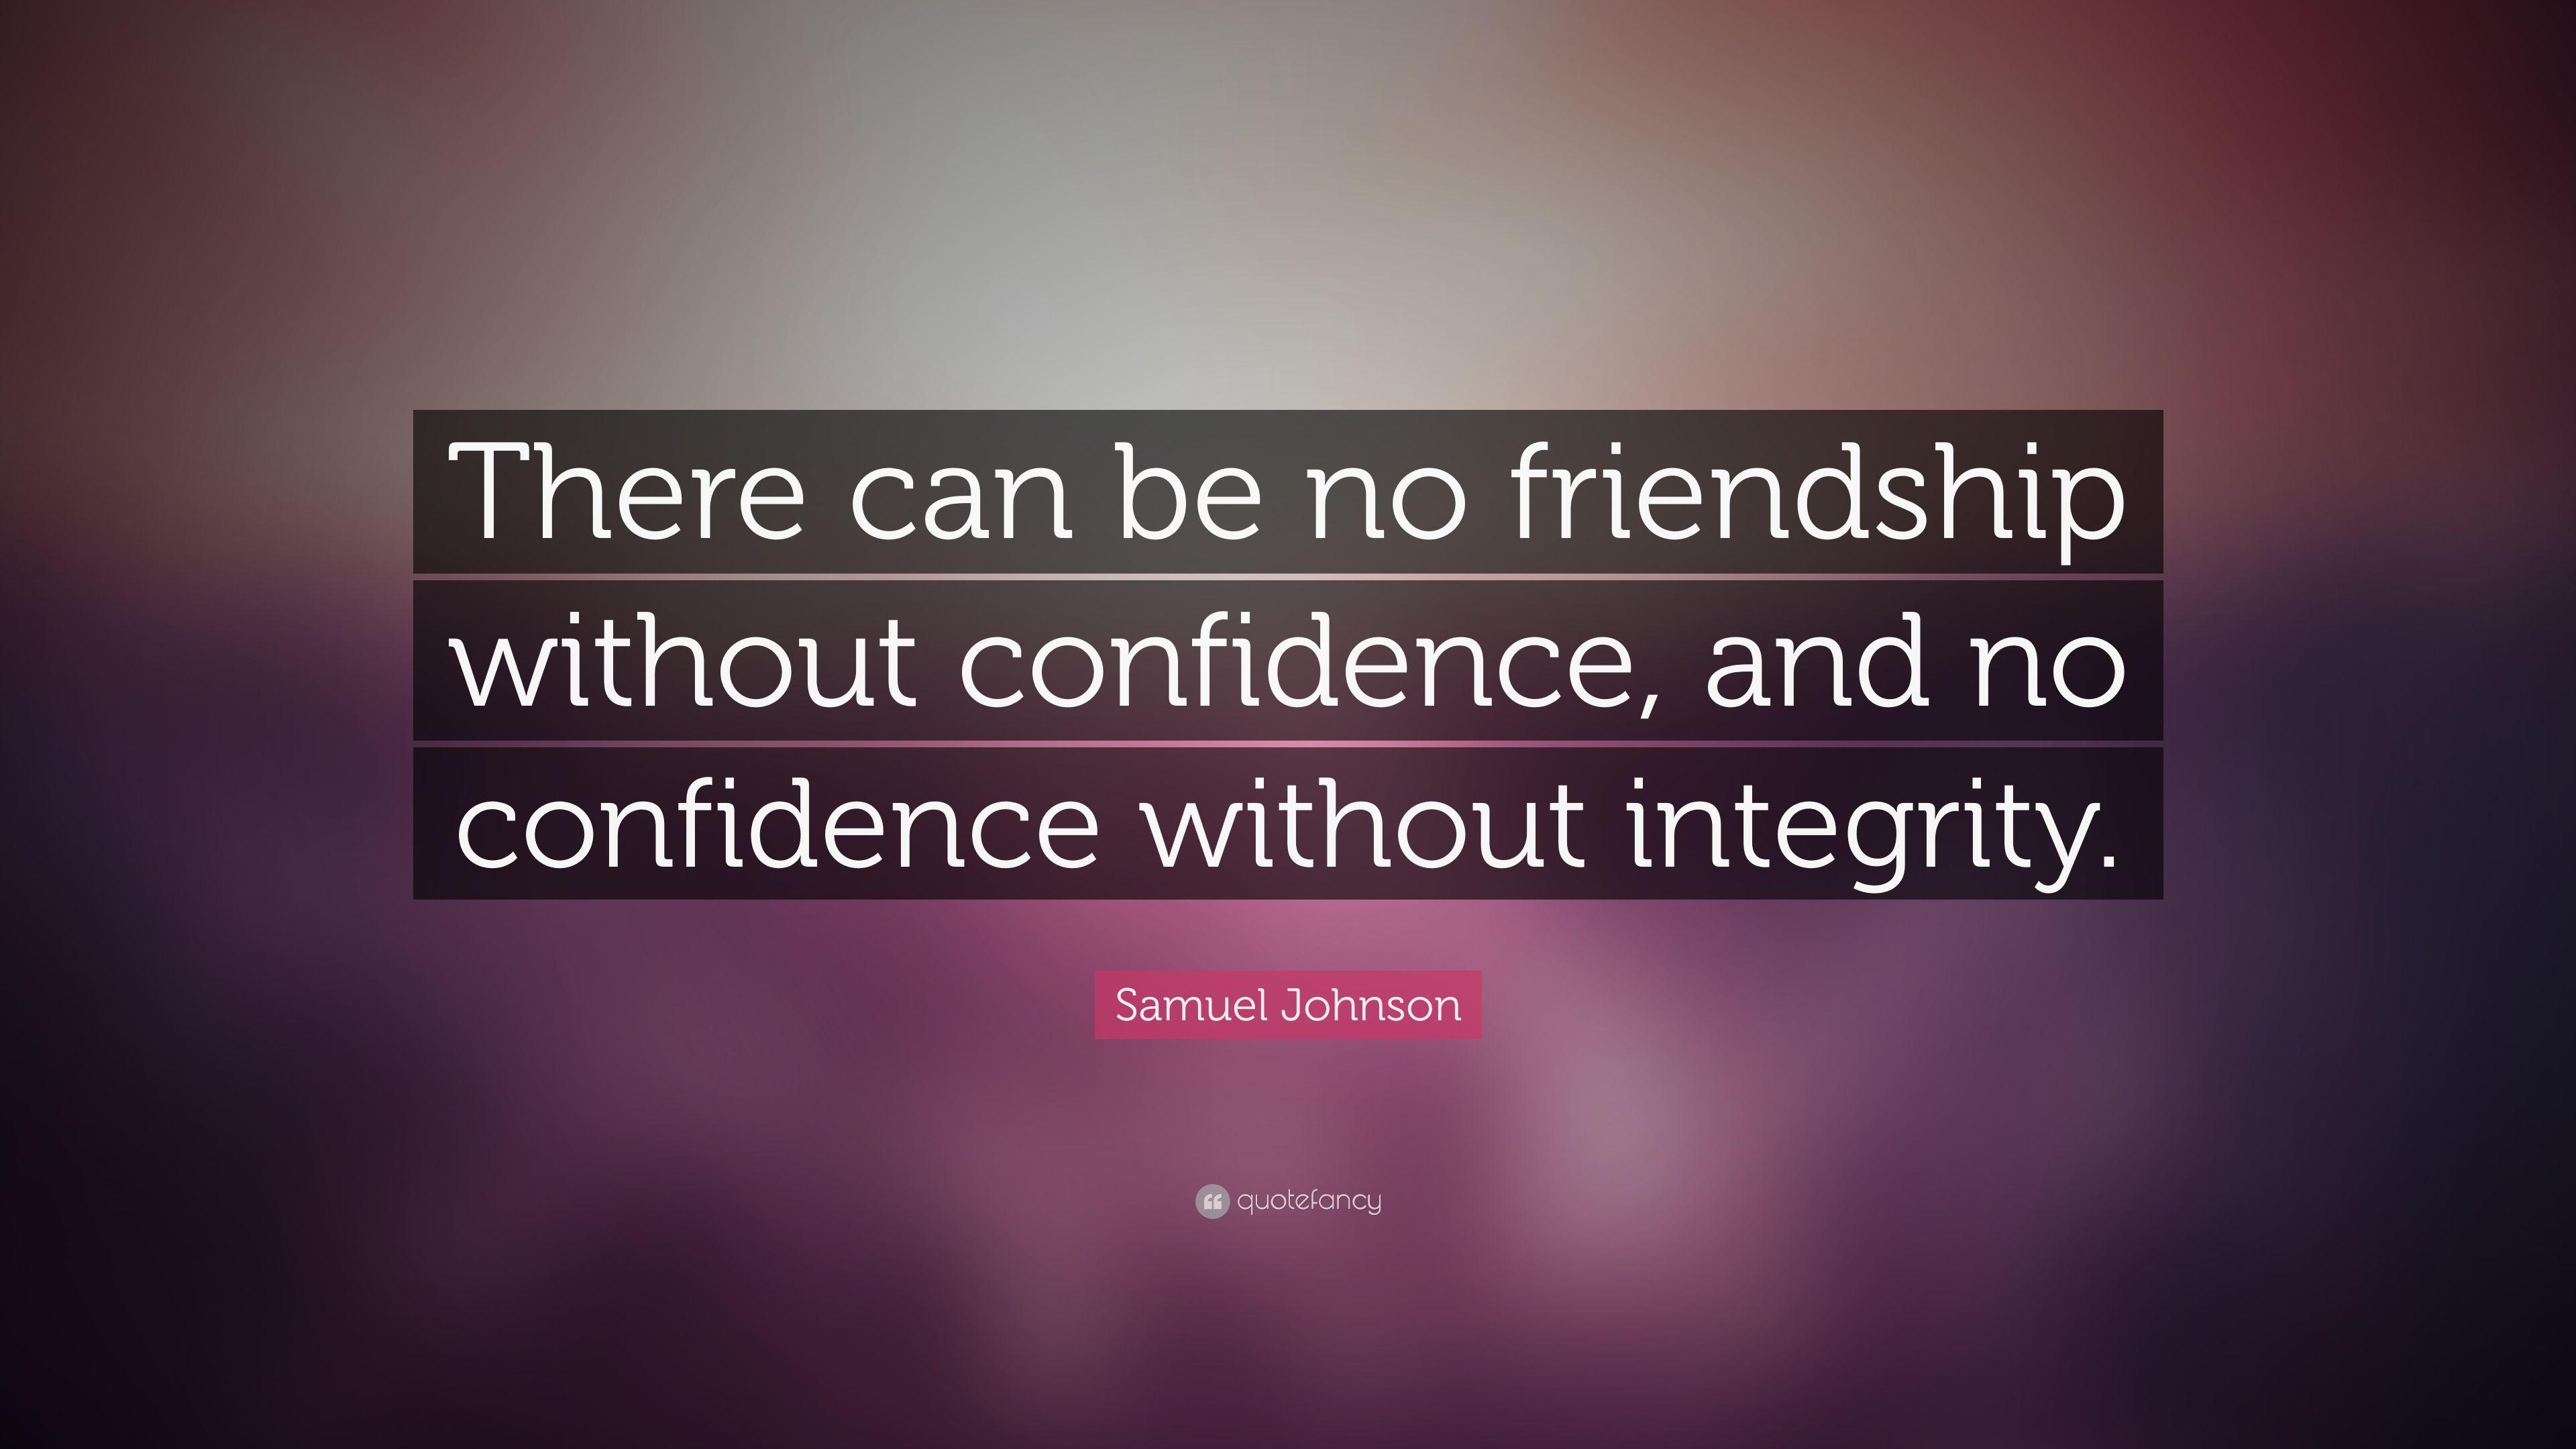 Samuel Johnson Quote: “There can be no friendship without